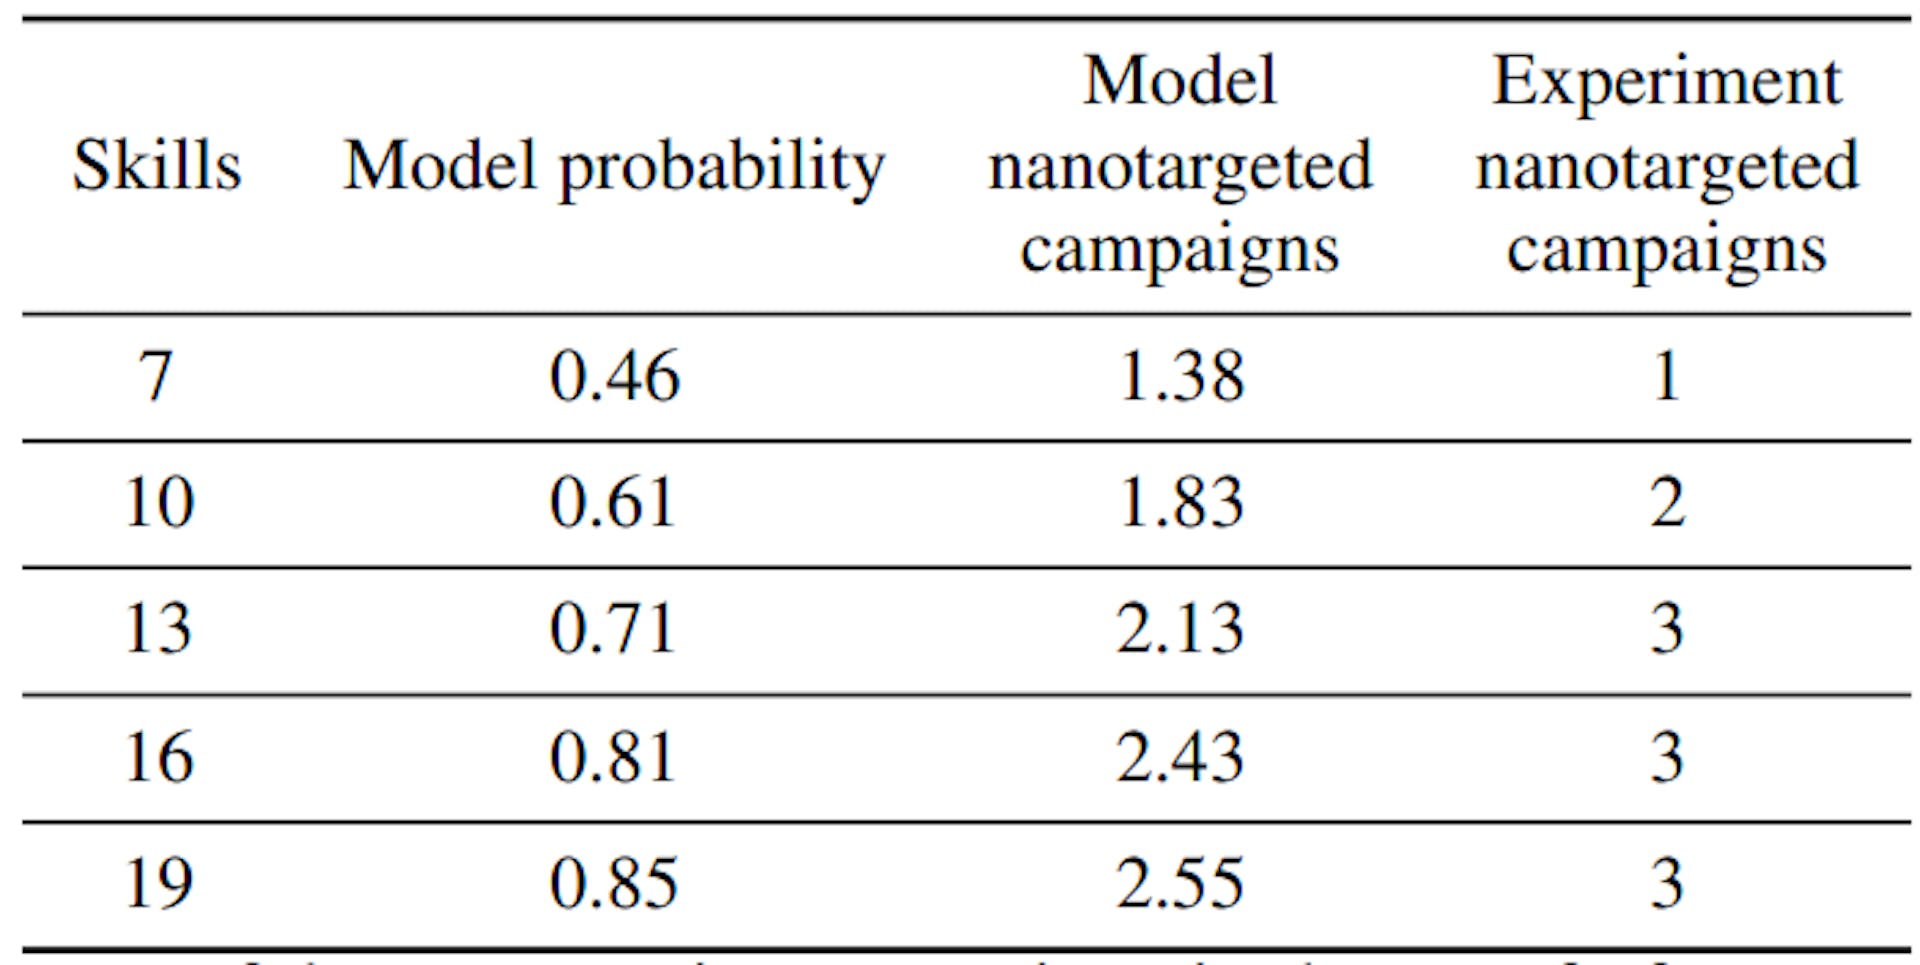 Table 2: Expected and actual successful nanotargeting campaigns in the proof of concept experiment. The first column includes the skills used in the campaign. The second column shows the success probability retrieved from the applied methodology. The third column shows the expected number of successful campaigns in the experiment out of the three targeted users per number of skills. The fourth column shows the actual number of successful campaigns in the proof of concept experiment.